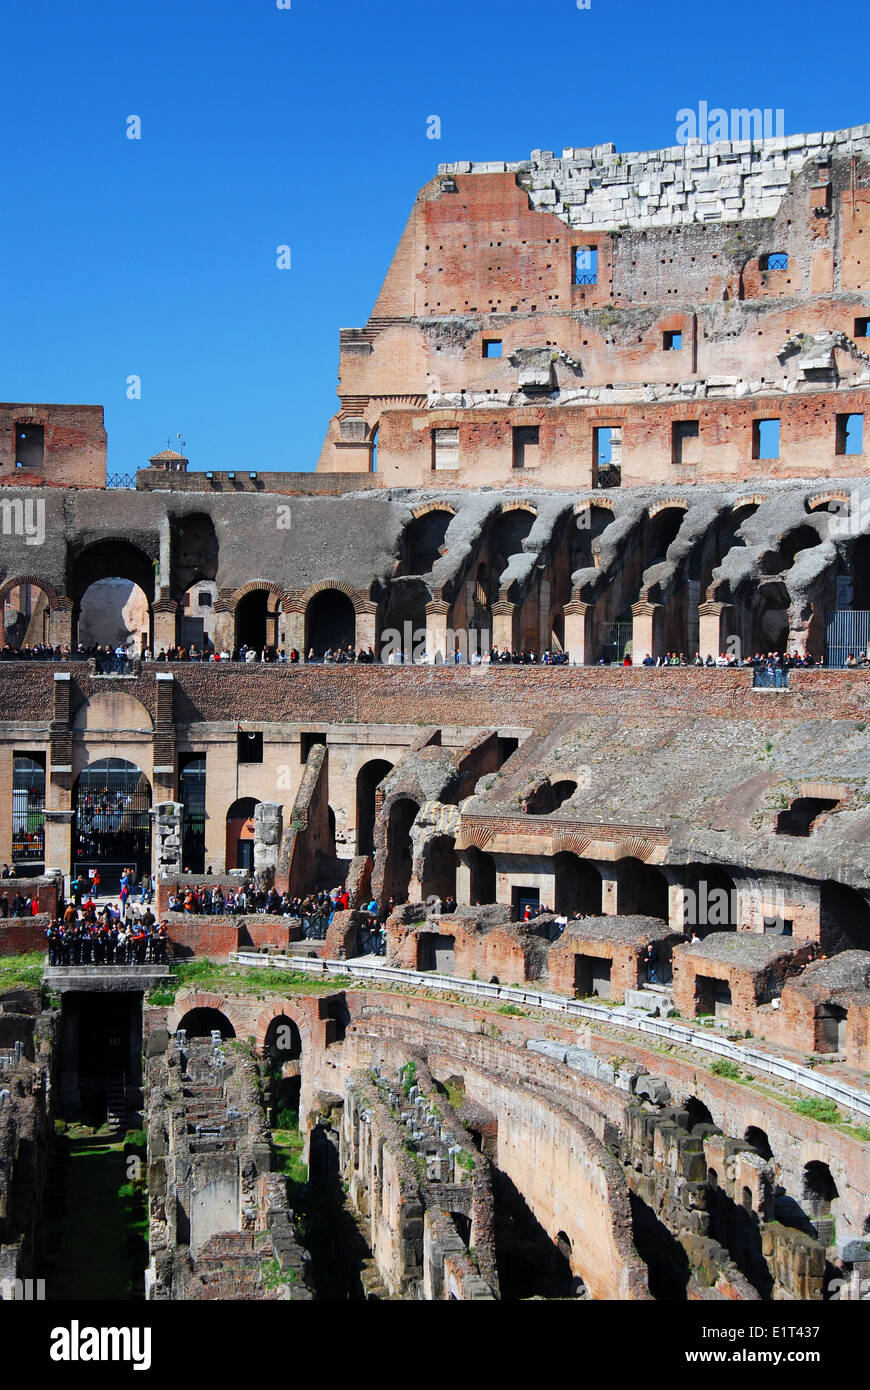 Ruins of Rome’s greatest amphitheater, Colosseum, built in 72AD by Vespasian. Roman Empire, Italy. Stock Photo